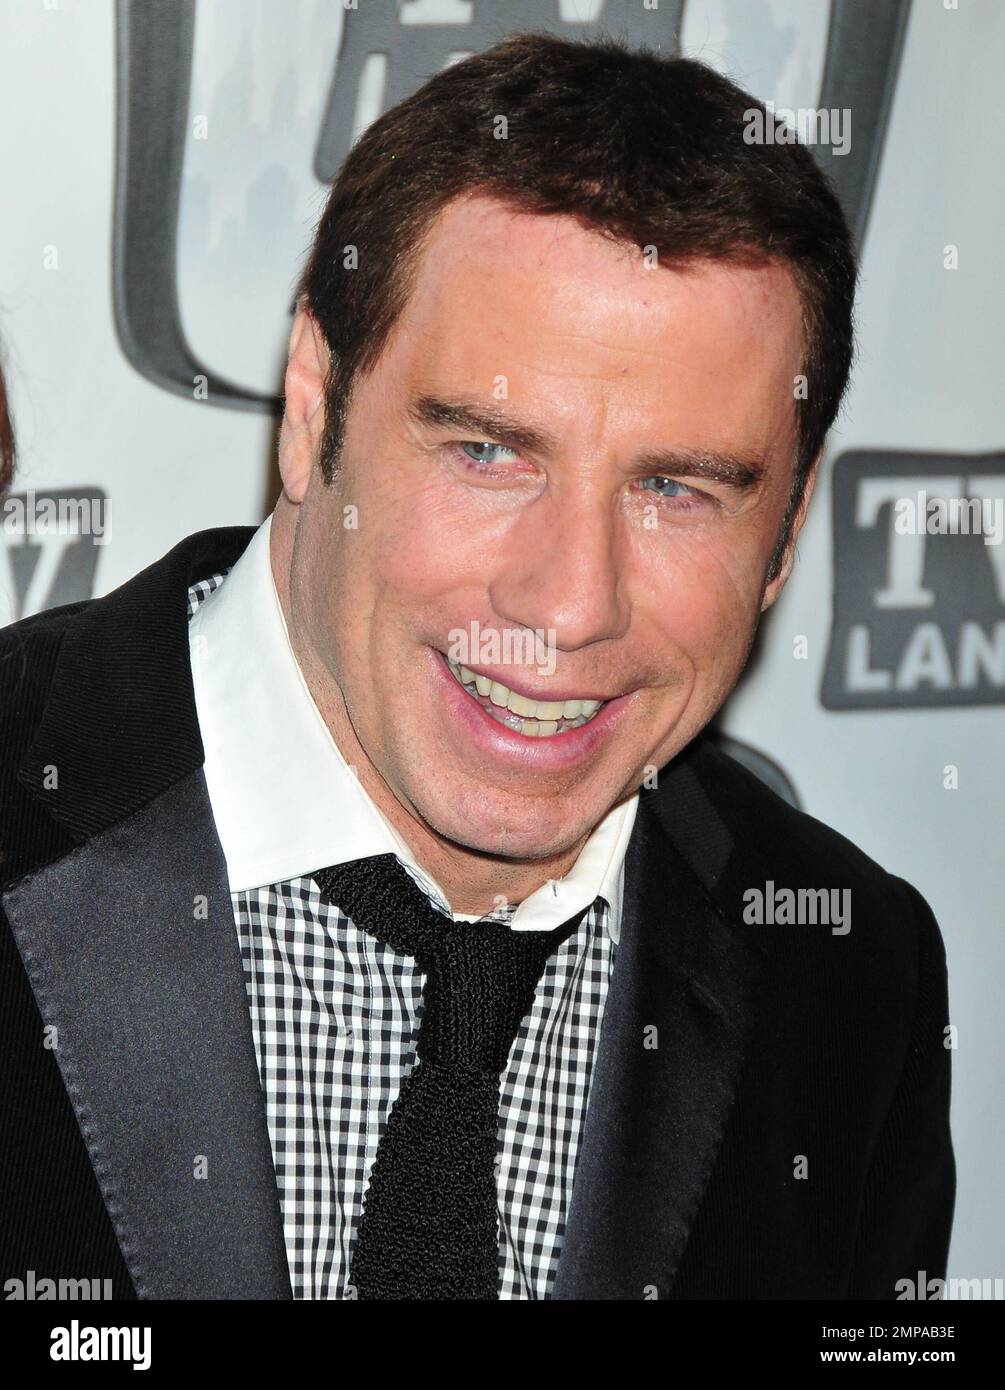 John Travolta appears in a great mood, and sports his hair weave, at the 9th Annual TV Land Awards, held at the Javits Center, and is joined by wife Kelly Preston and the cast of the 1970s TV series "Welcome Back, Kotter". New York, NY. 04/10/11. Stock Photo